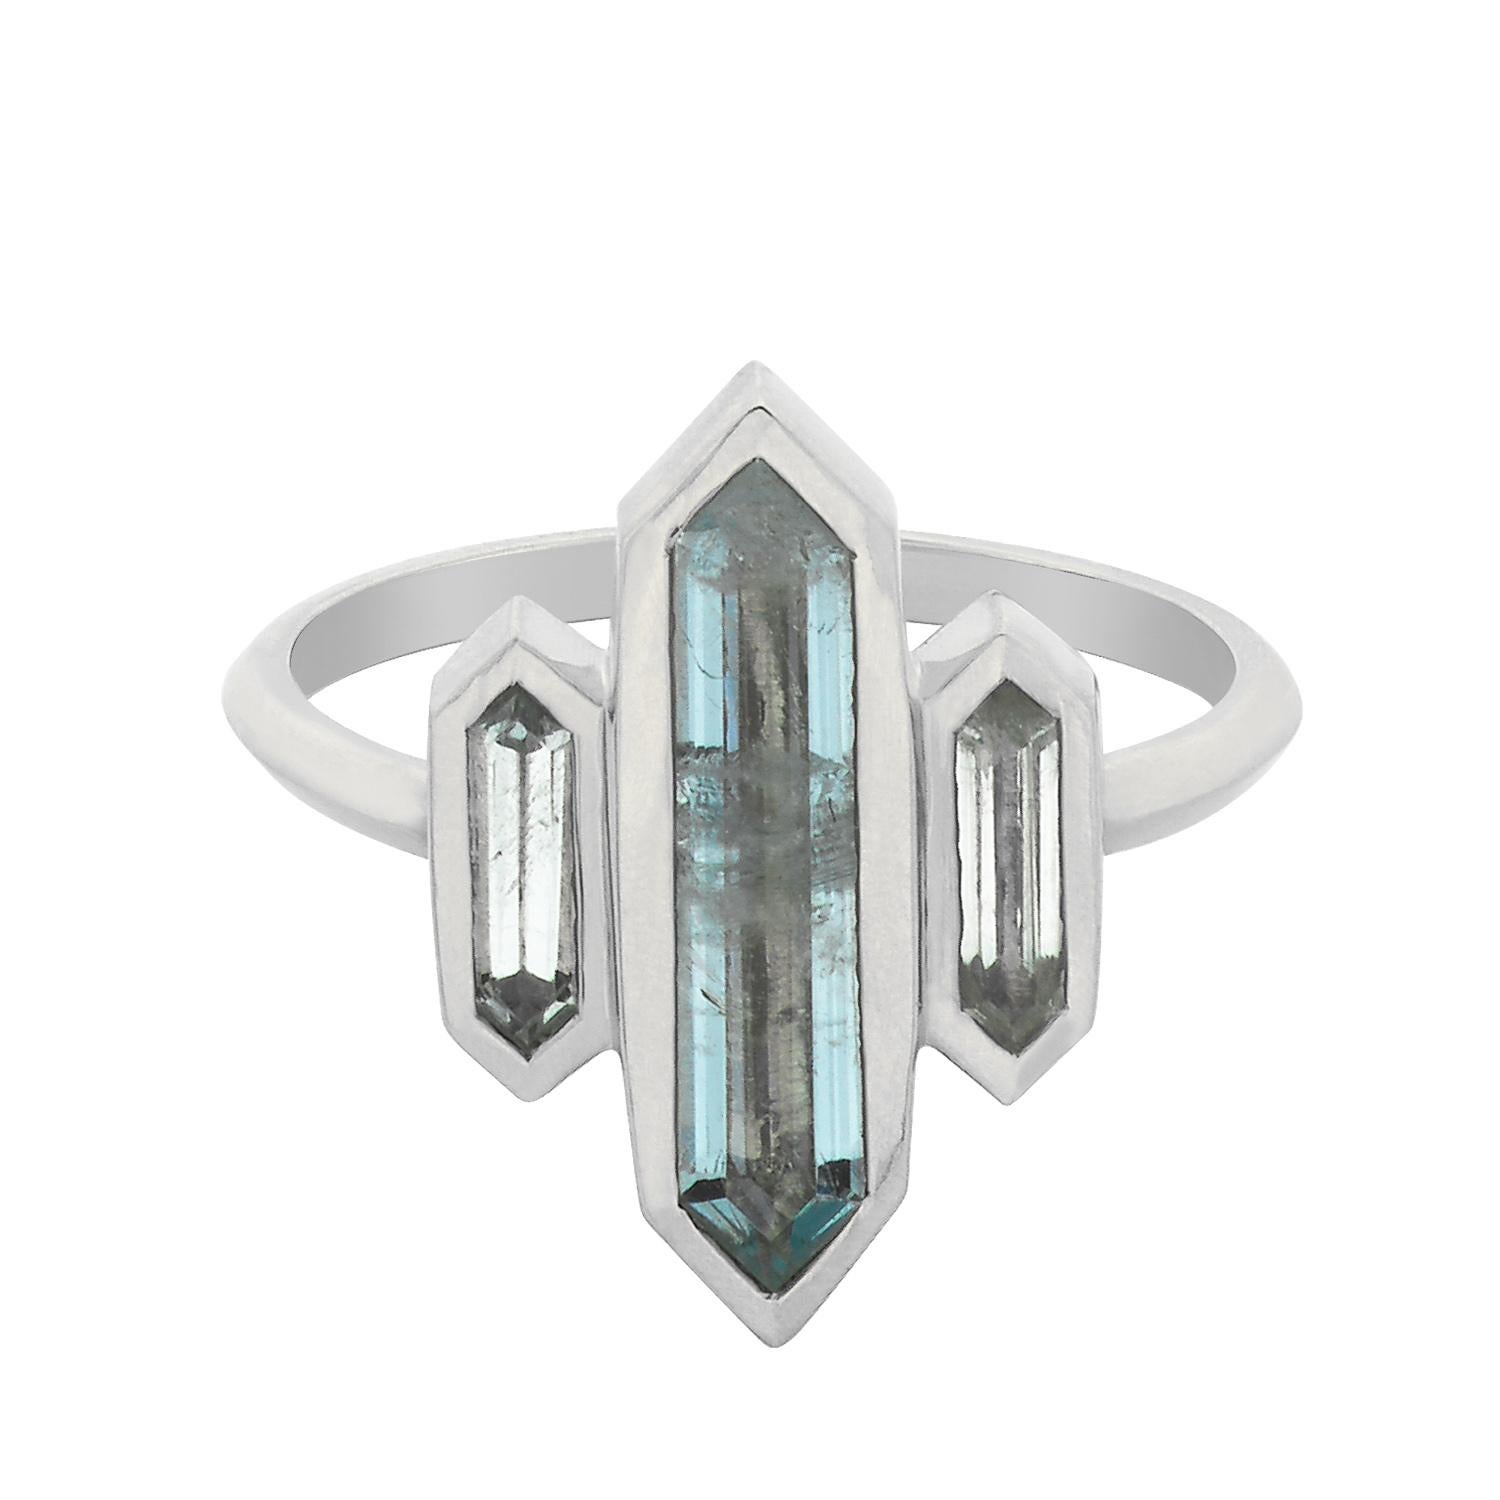 Kailas is the centre of the Buddhist universe, and the mountain, as well as two lakes over which it rises, have been sacred to Buddhists, Hindus, Jains, and Bonpos for thousands of years.

The Kailas ring features three crystal cut Aquamarine set in